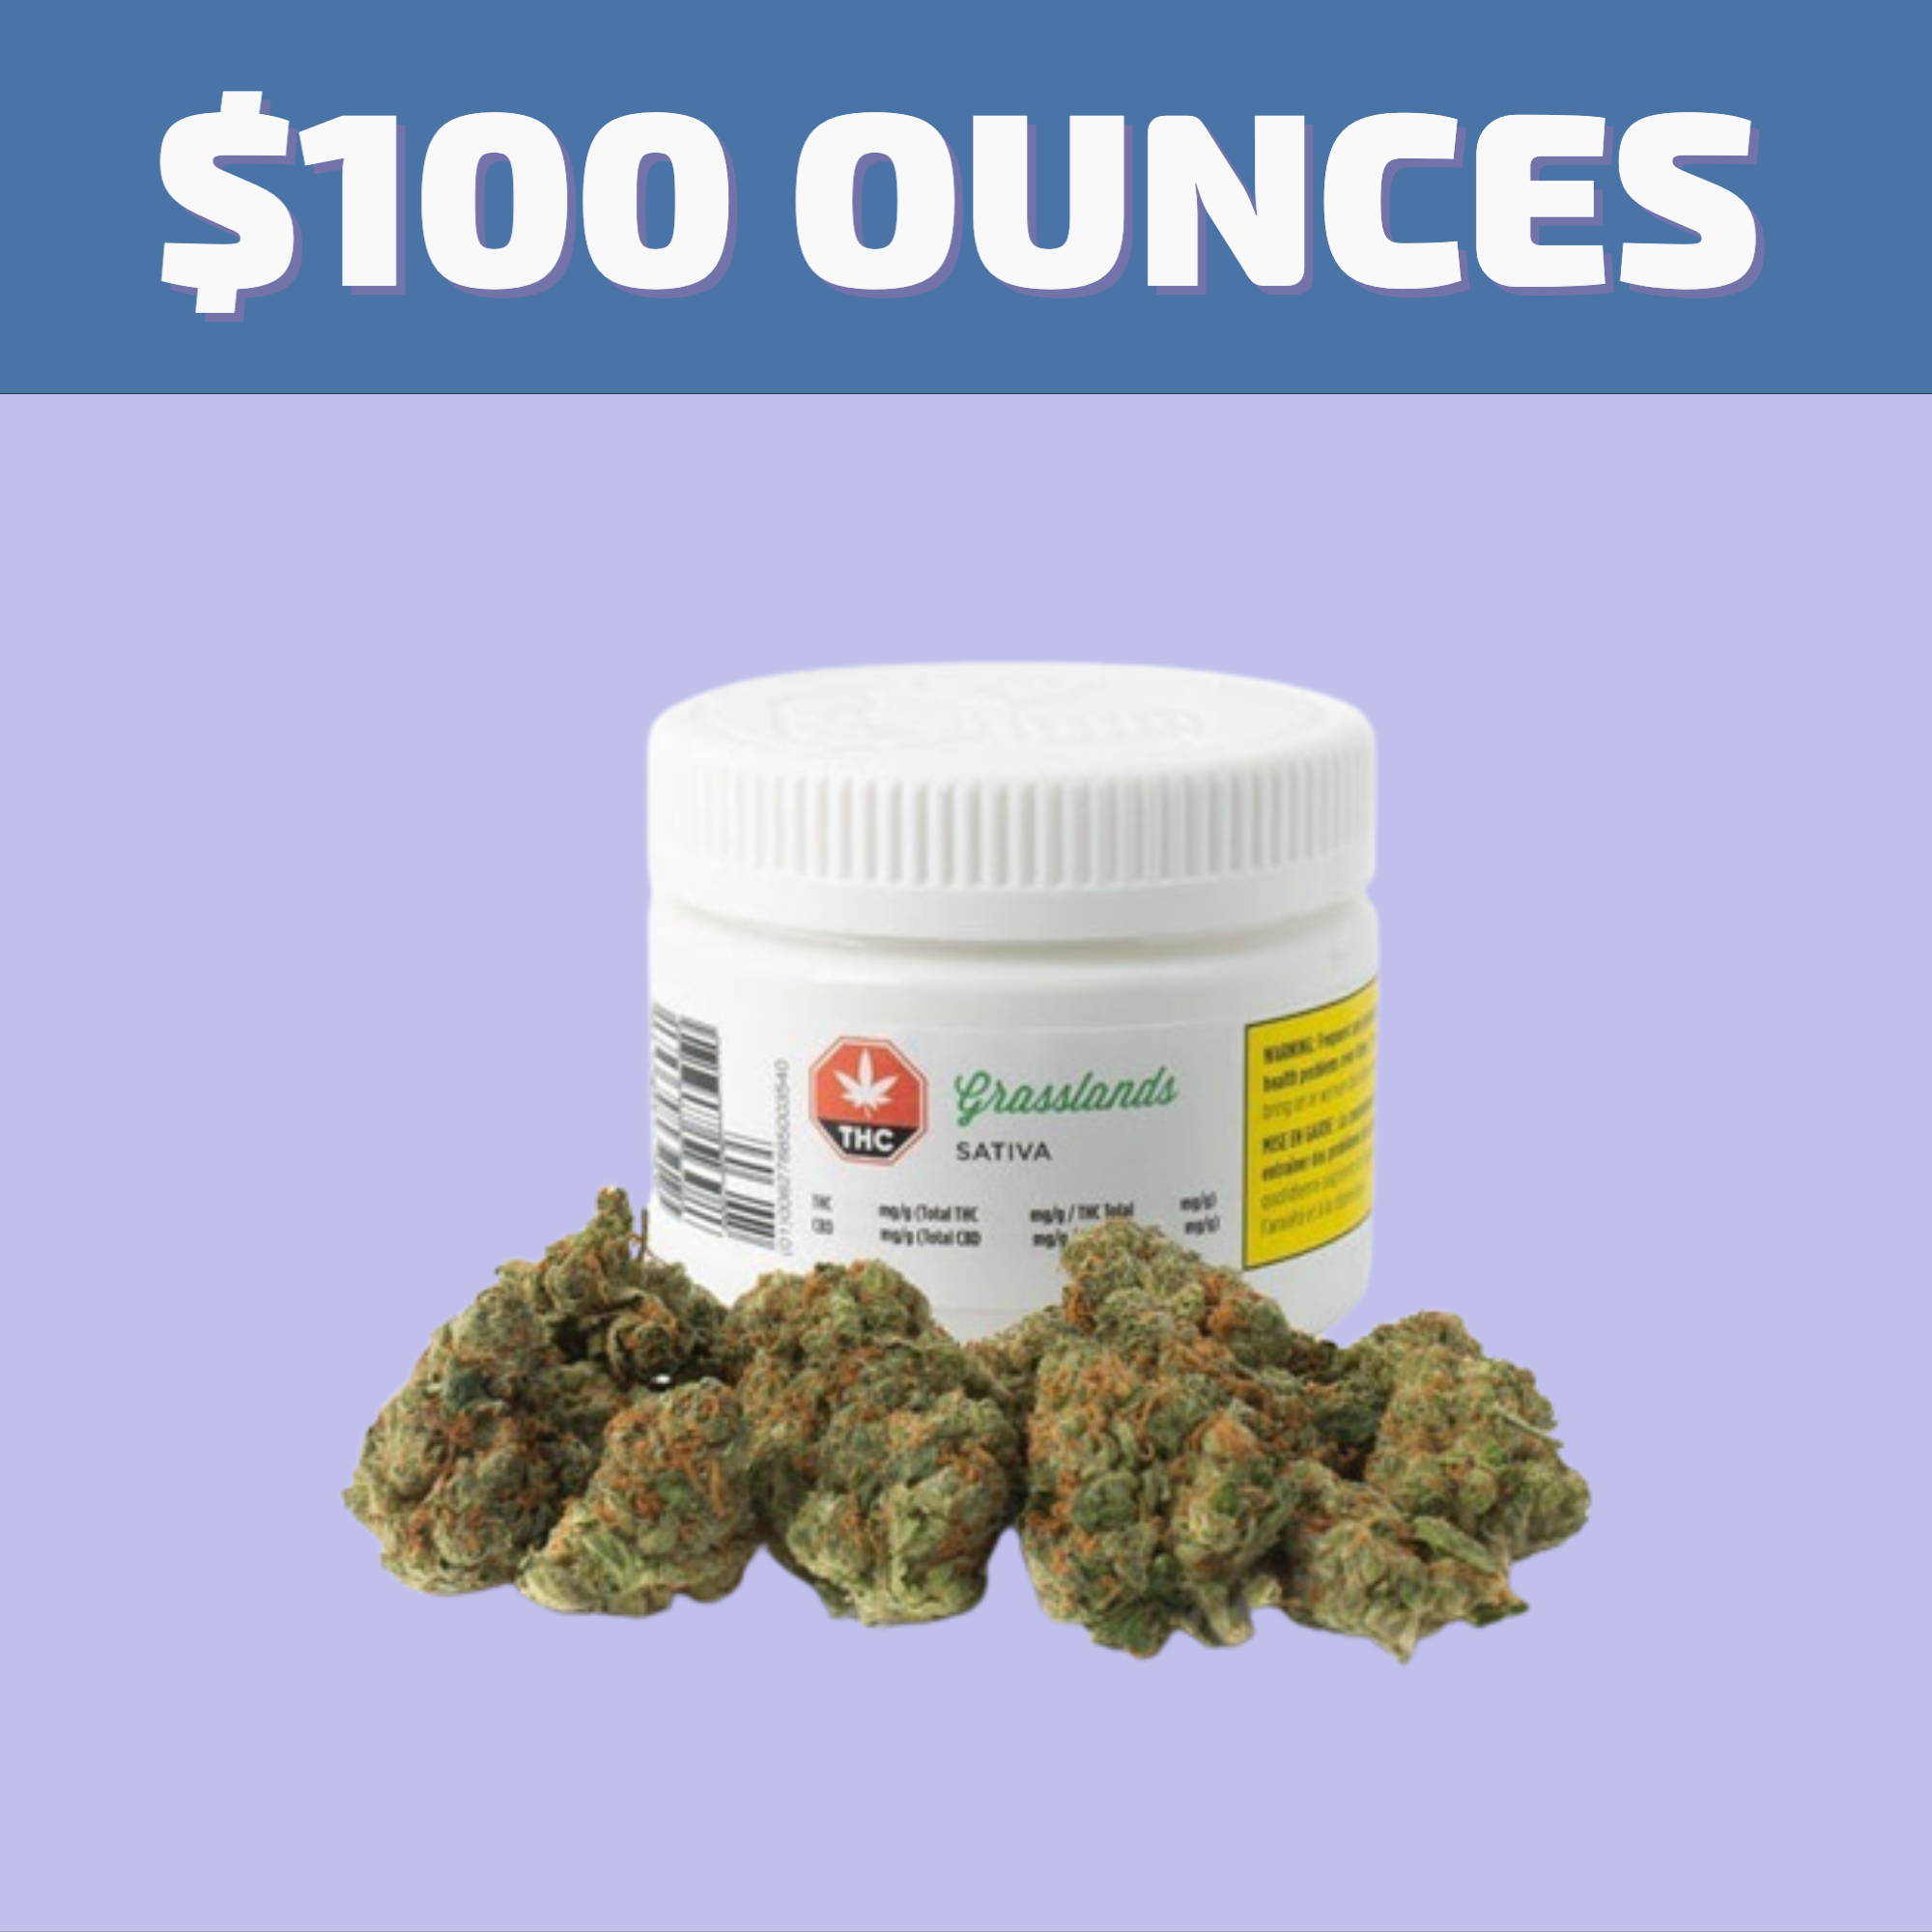 Buy Cheap Ounces of Weed in Winnipeg and have a $100 ounce of weed delivered same day, pick up in-store, or have it shipped Canada Post.